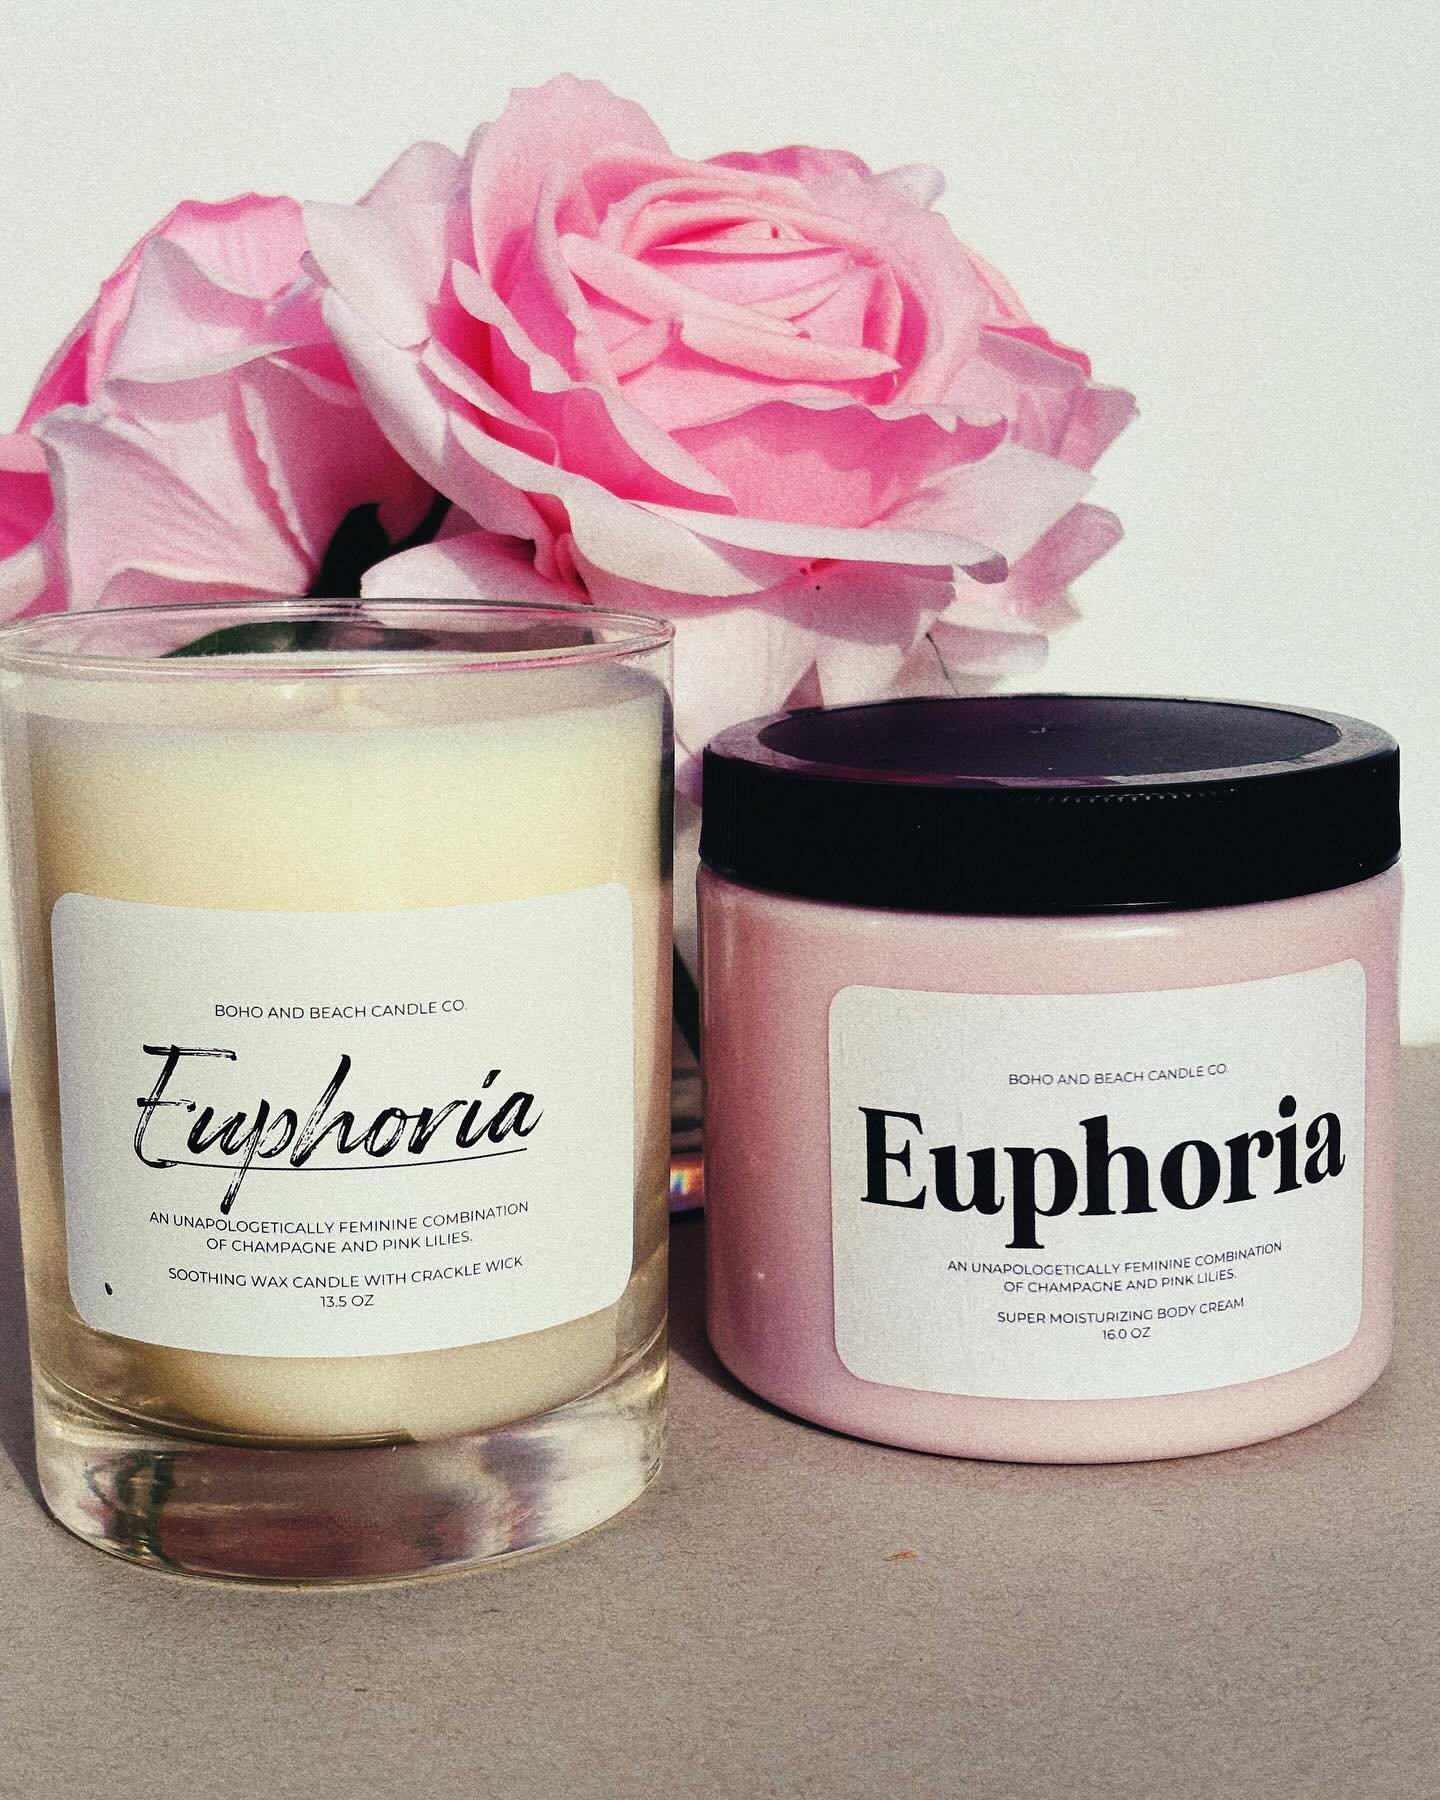 Perfect for Valentines Day&mdash;- Euphoria&mdash; soft &amp; dreamy, berries, pink rose, champagne. #valentines #valentinesgift #vdaygifts #loveyourself #selfcare #perfectforbath #pinkbodycream #candles #candleshop #euphoria #sweethome #giftsforhim 